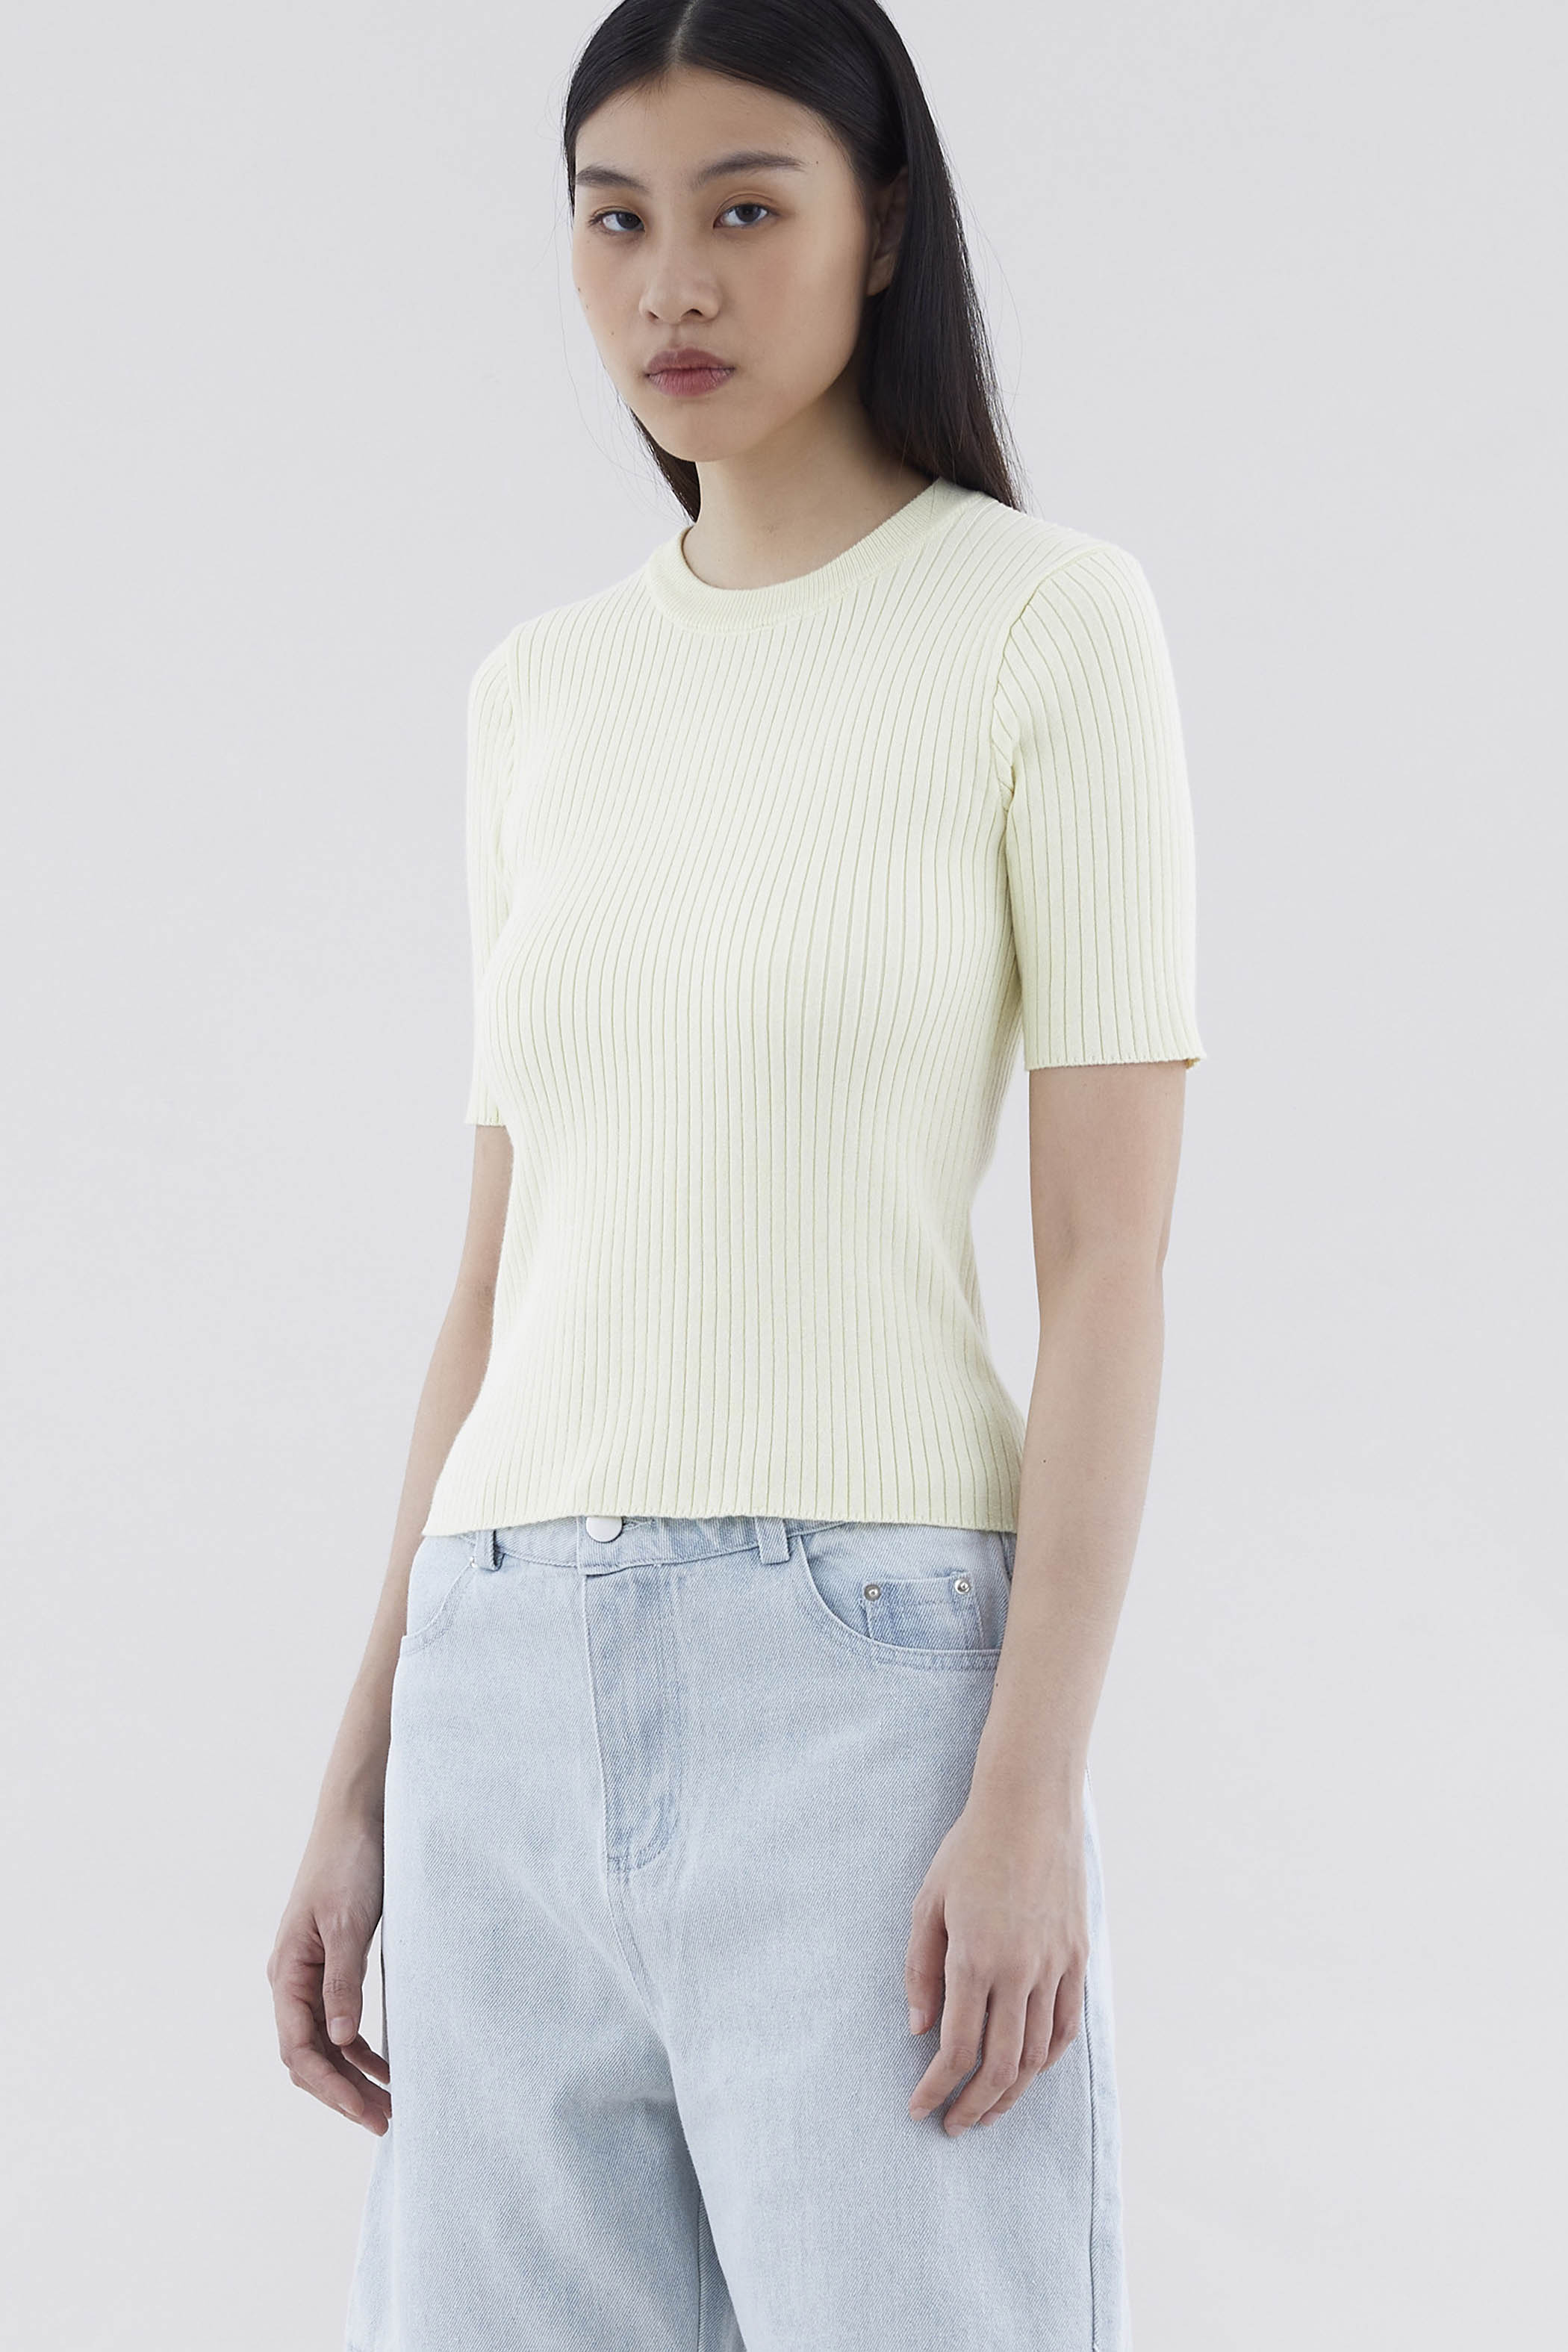 Kules Fitted Knit Top